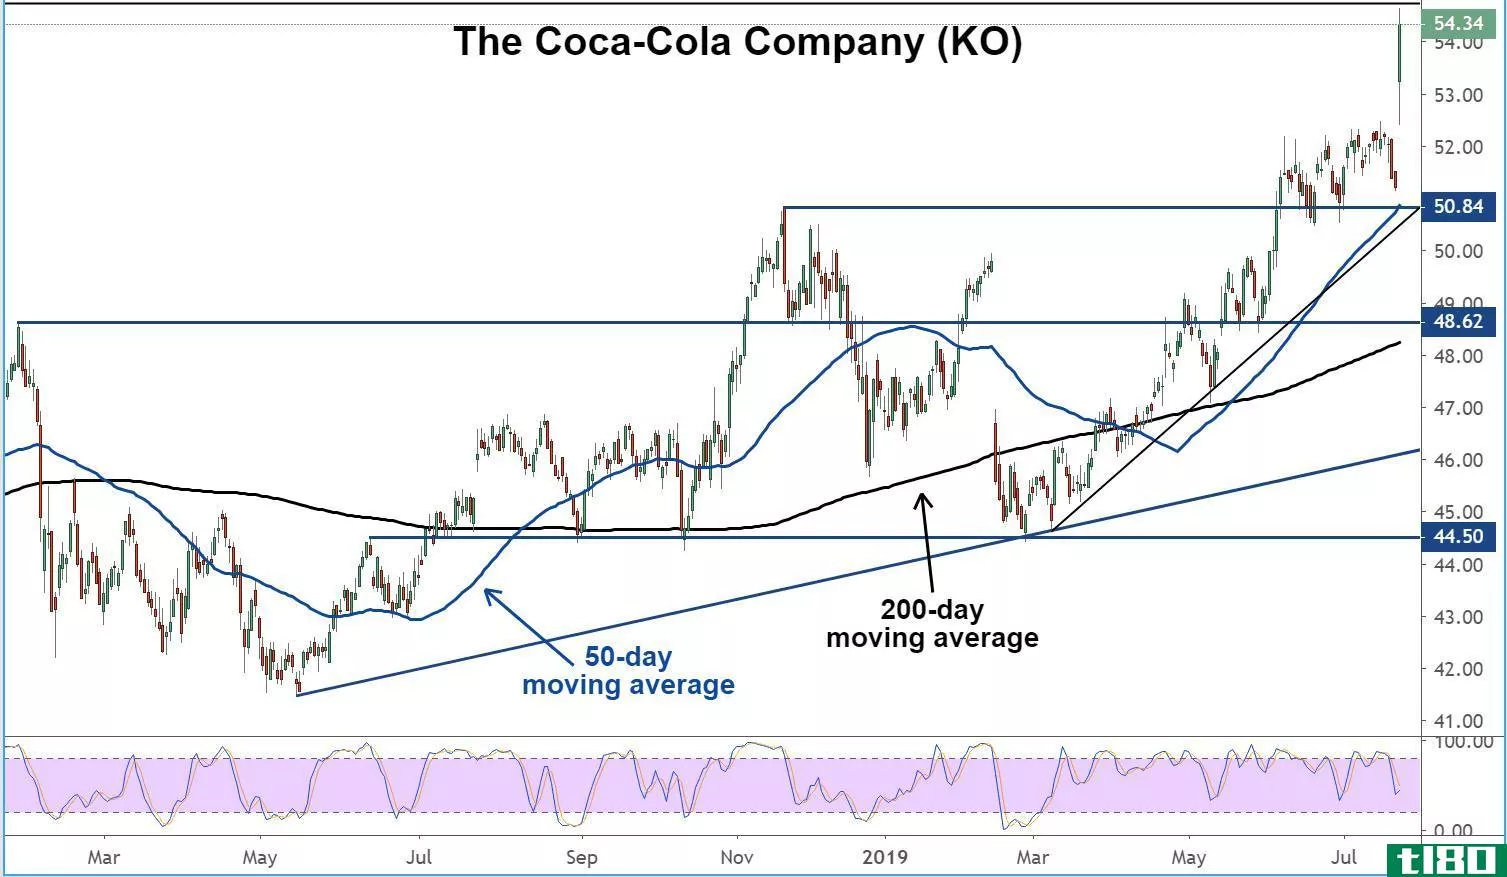 Chart showing the share price performance of The Coca-Cola Company (KO)